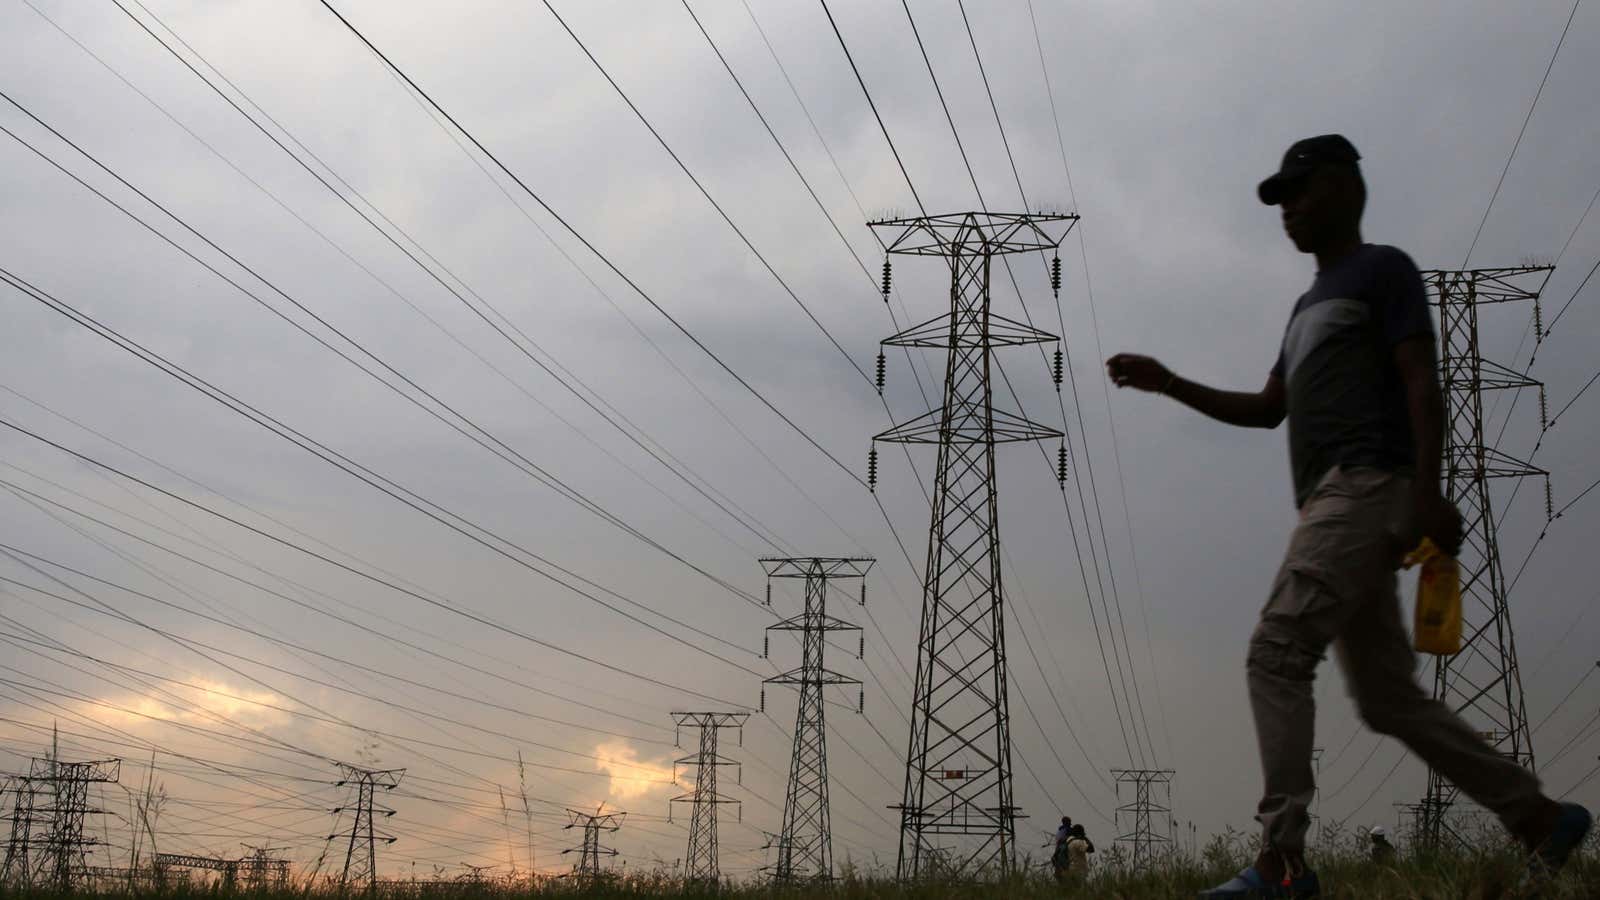 A man walks past electricity pylons in Soweto, South Africa.